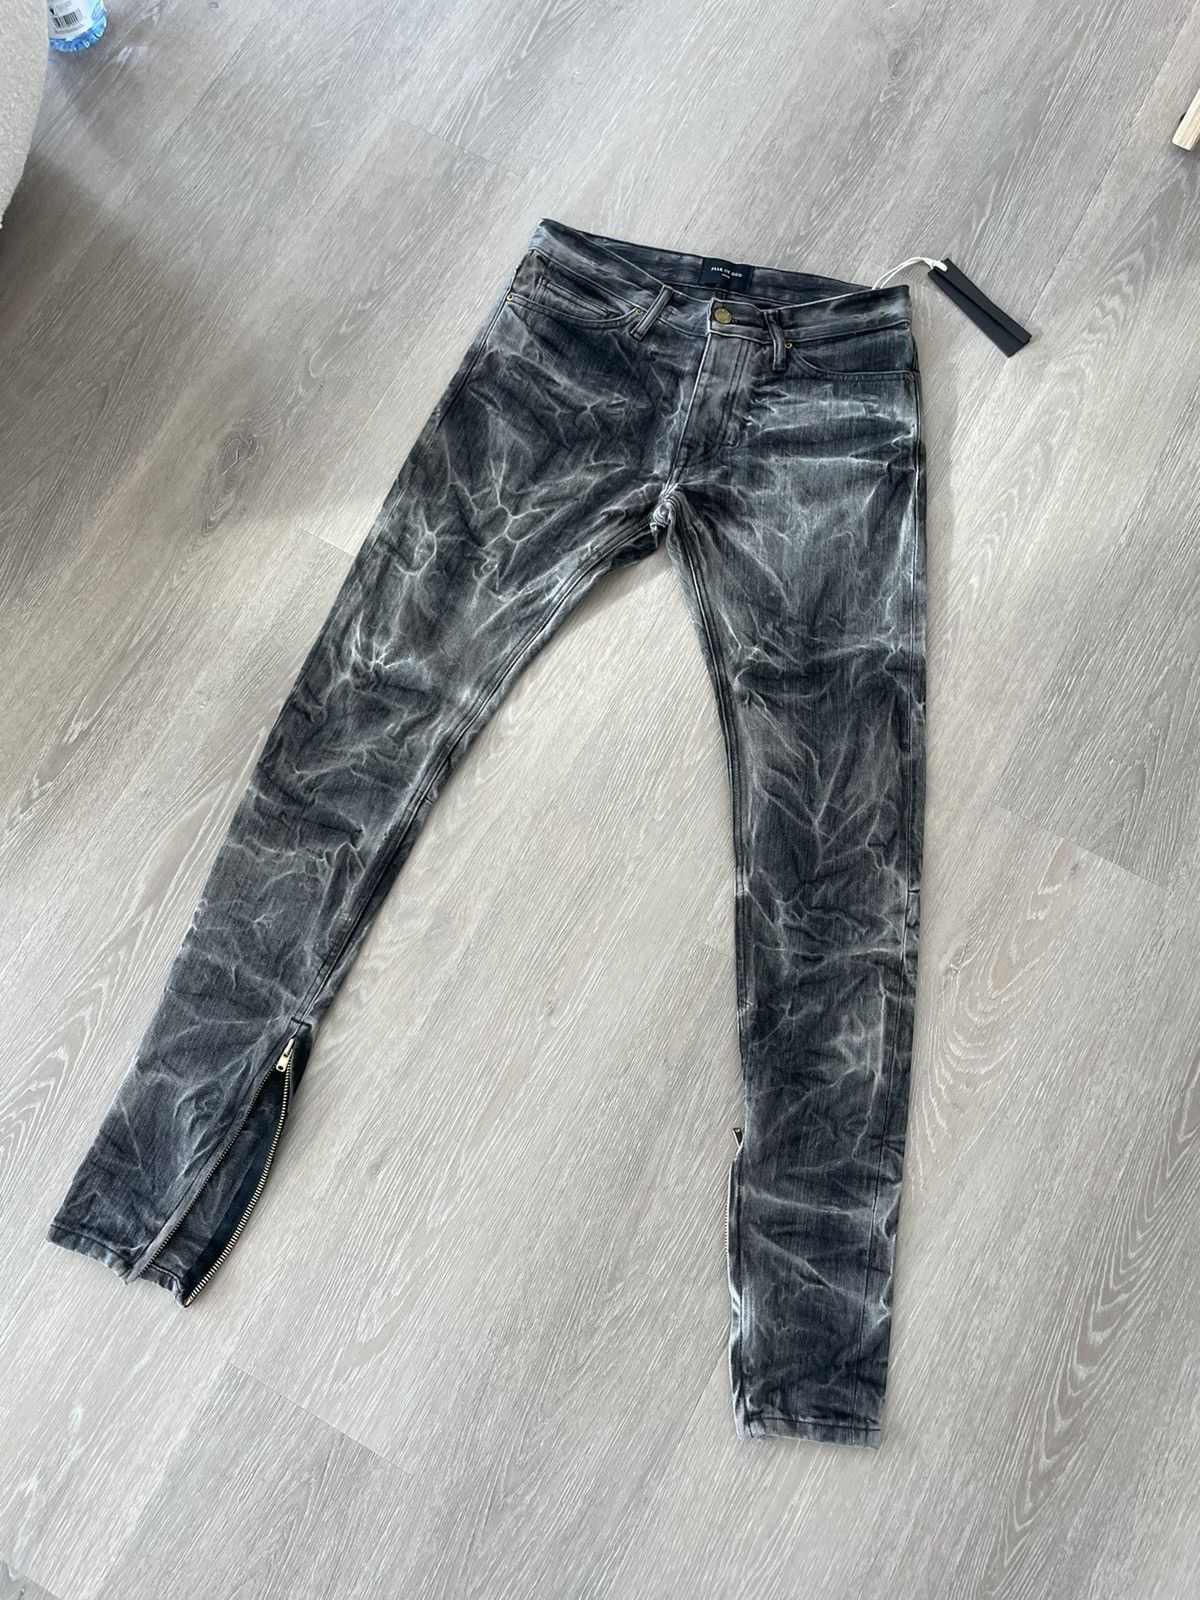 Fear of God Fear of God fifth collection black holy water jeans | Grailed